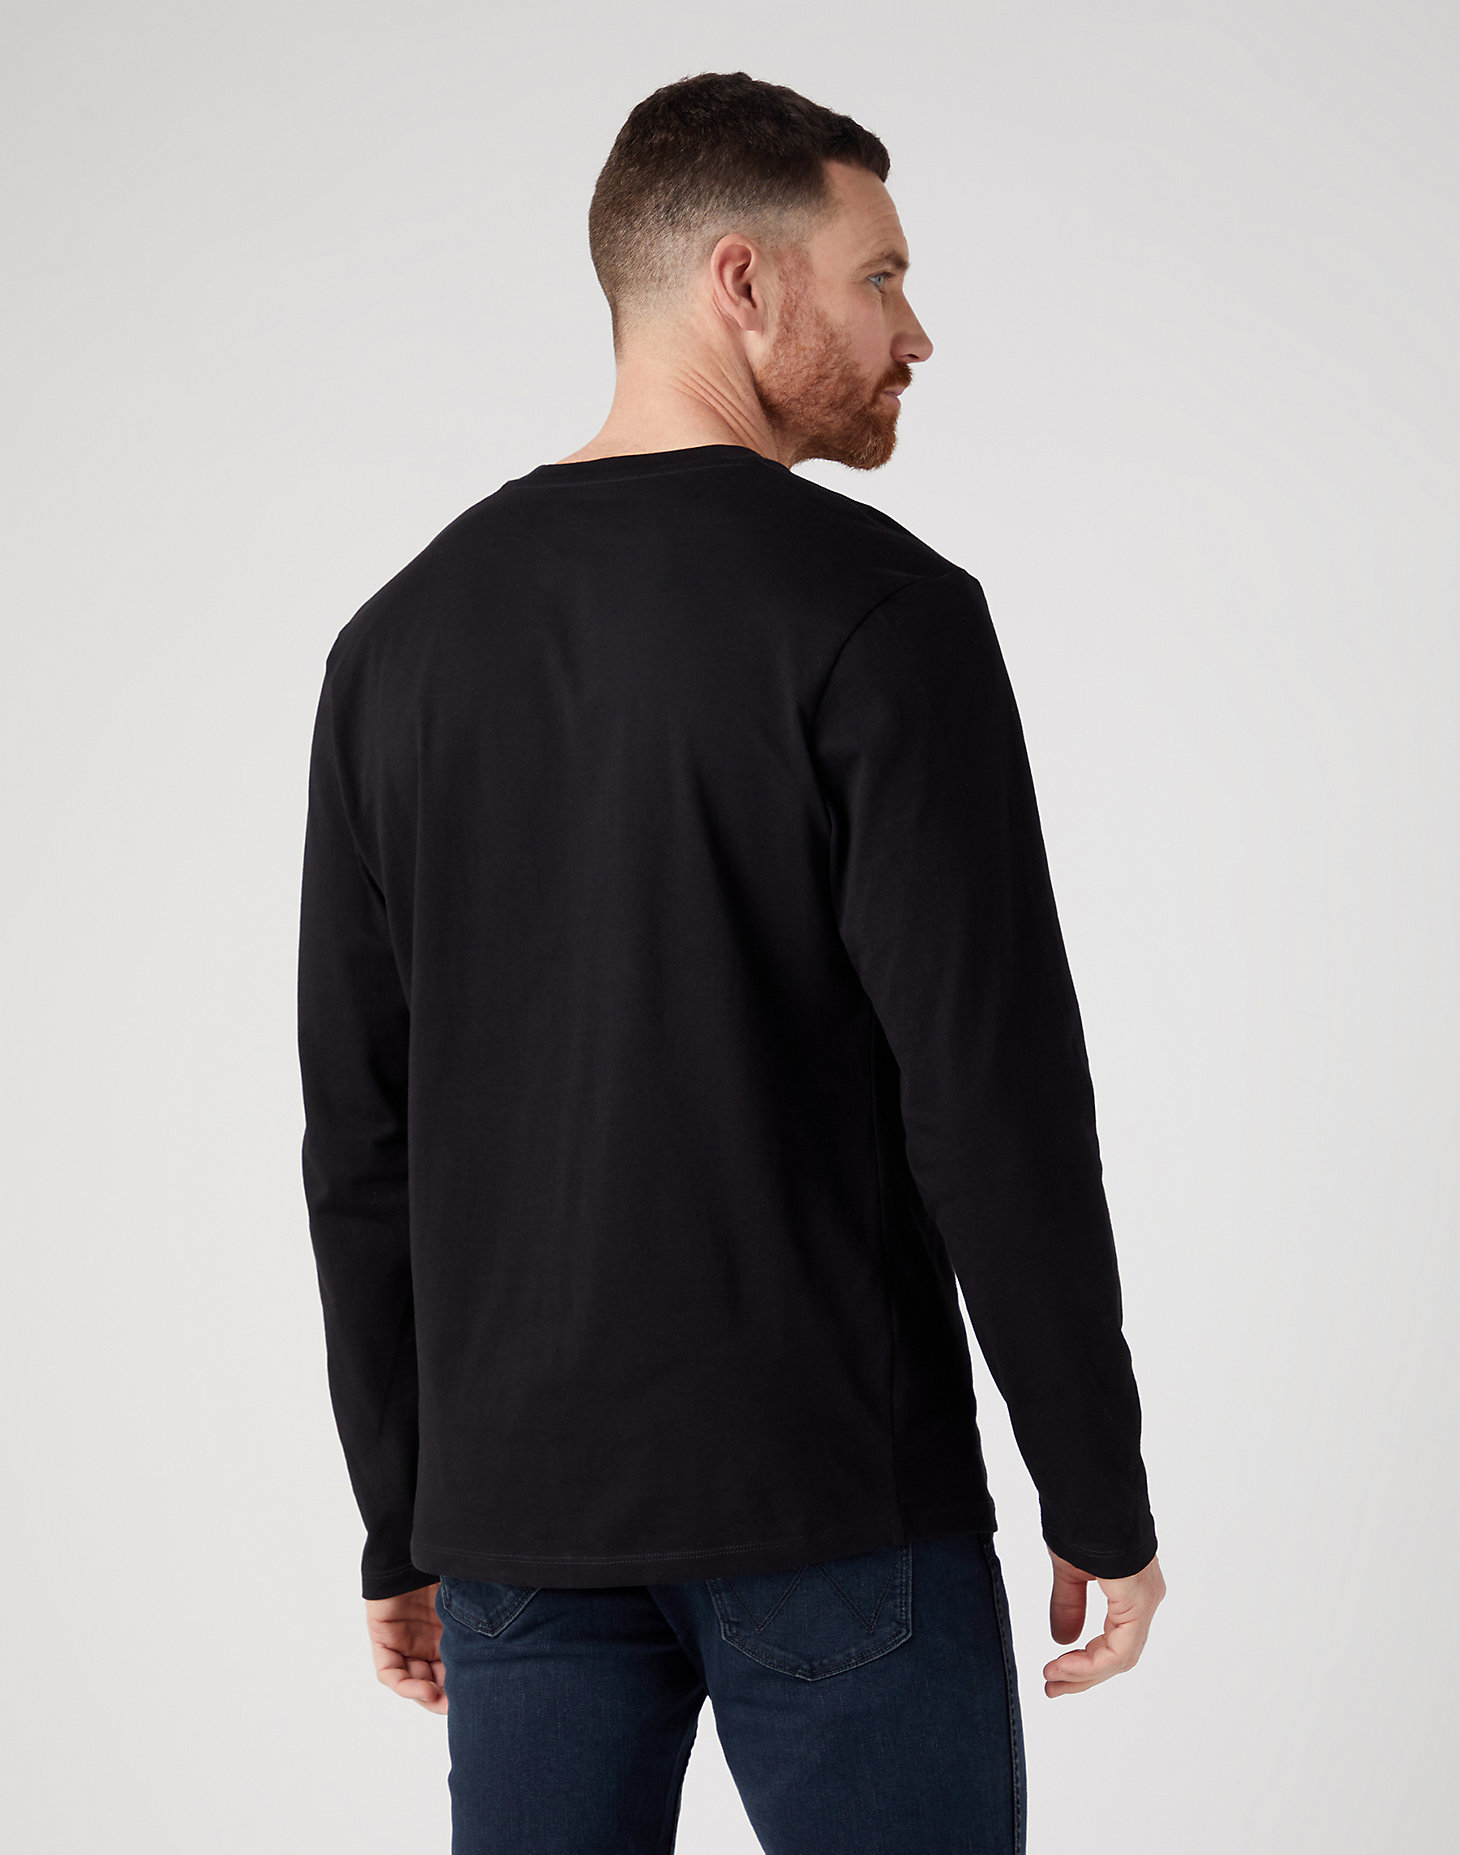 Long Sleeve Sign Off Tee in Black alternative view 2